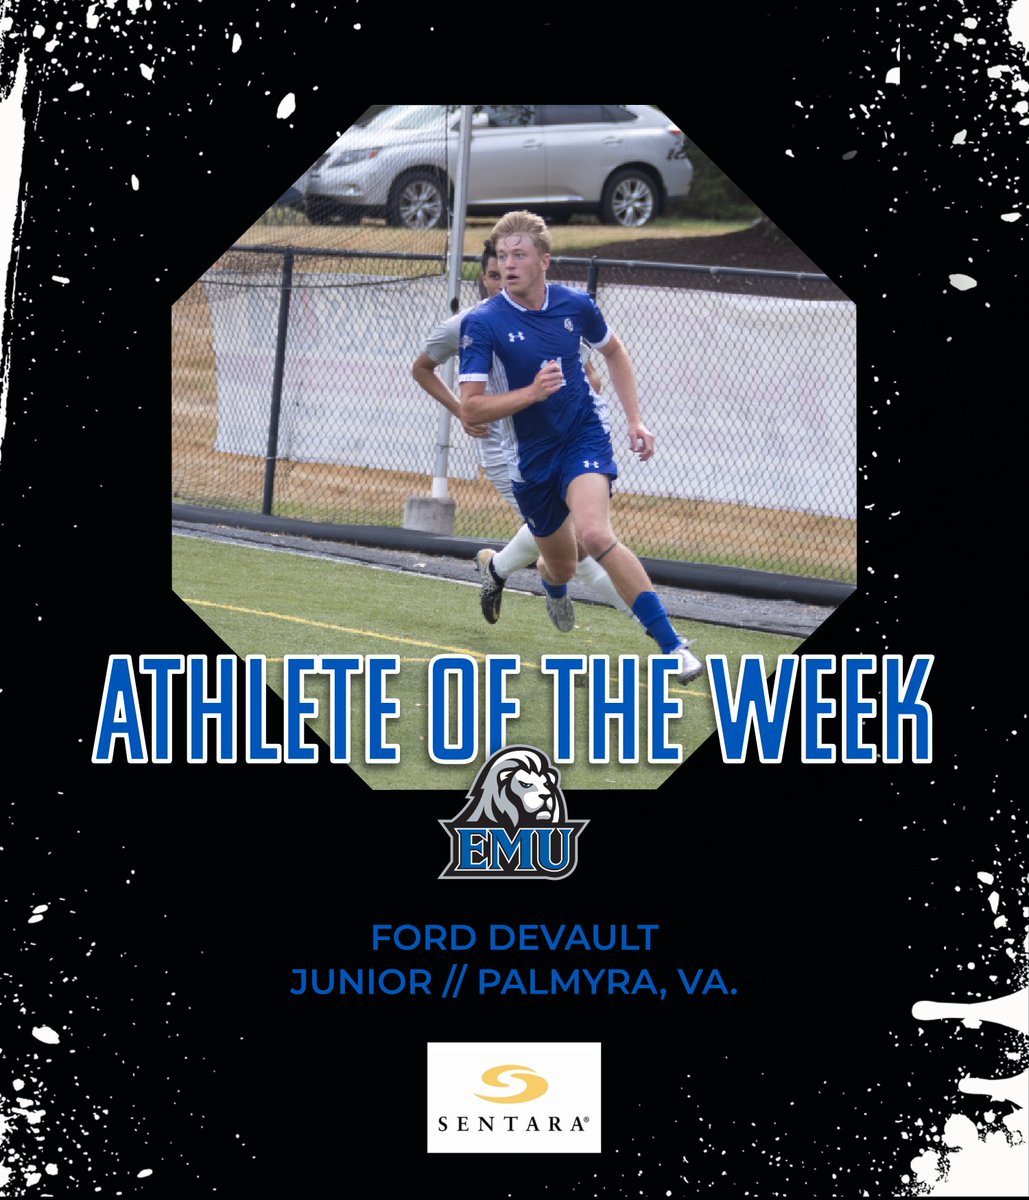 It's an all-Fluvanna County edition of 𝙍𝙤𝙮𝙖𝙡𝙨 𝘼𝙩𝙝𝙡𝙚𝙩𝙚 𝙤𝙛 𝙩𝙝𝙚 𝙒𝙚𝙚𝙠! Congratulations to Ford DeVault of @EmuMensSoccer and Sophia Denby of @emu_wvb! 👏👍

#RoyalPride | #CompeteTogether